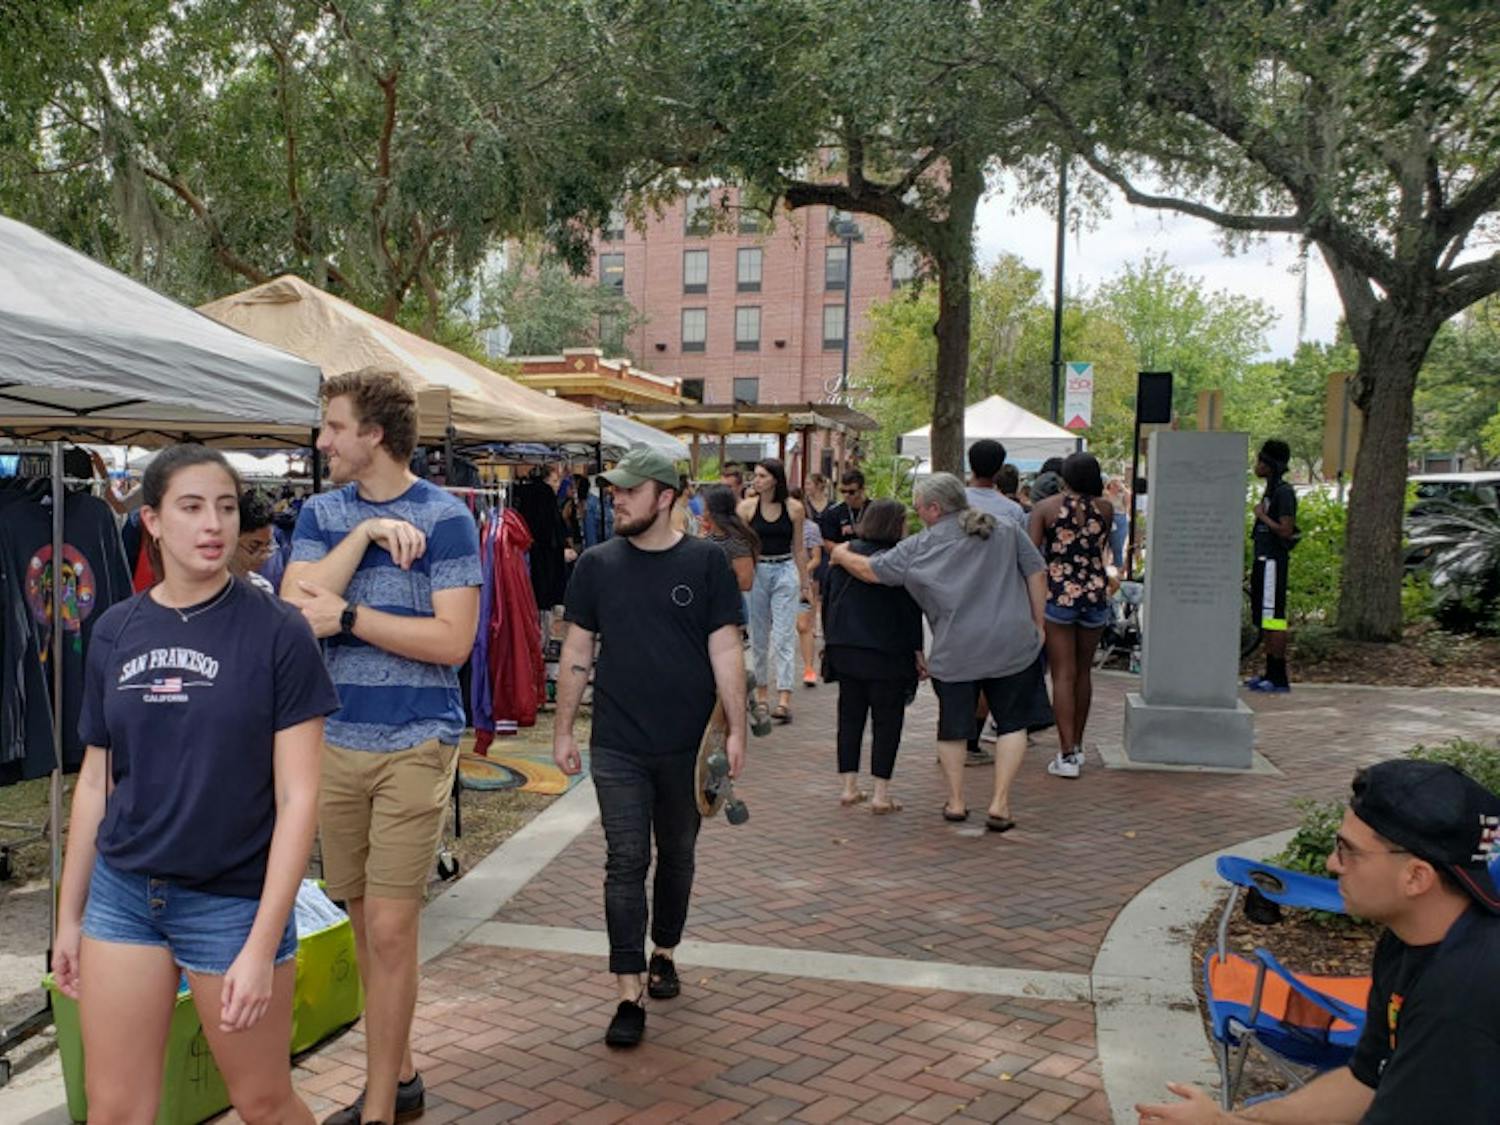 The Gainesville community visits the Florida Vintage Market at Bo Diddley Plaza on Oct. 6.